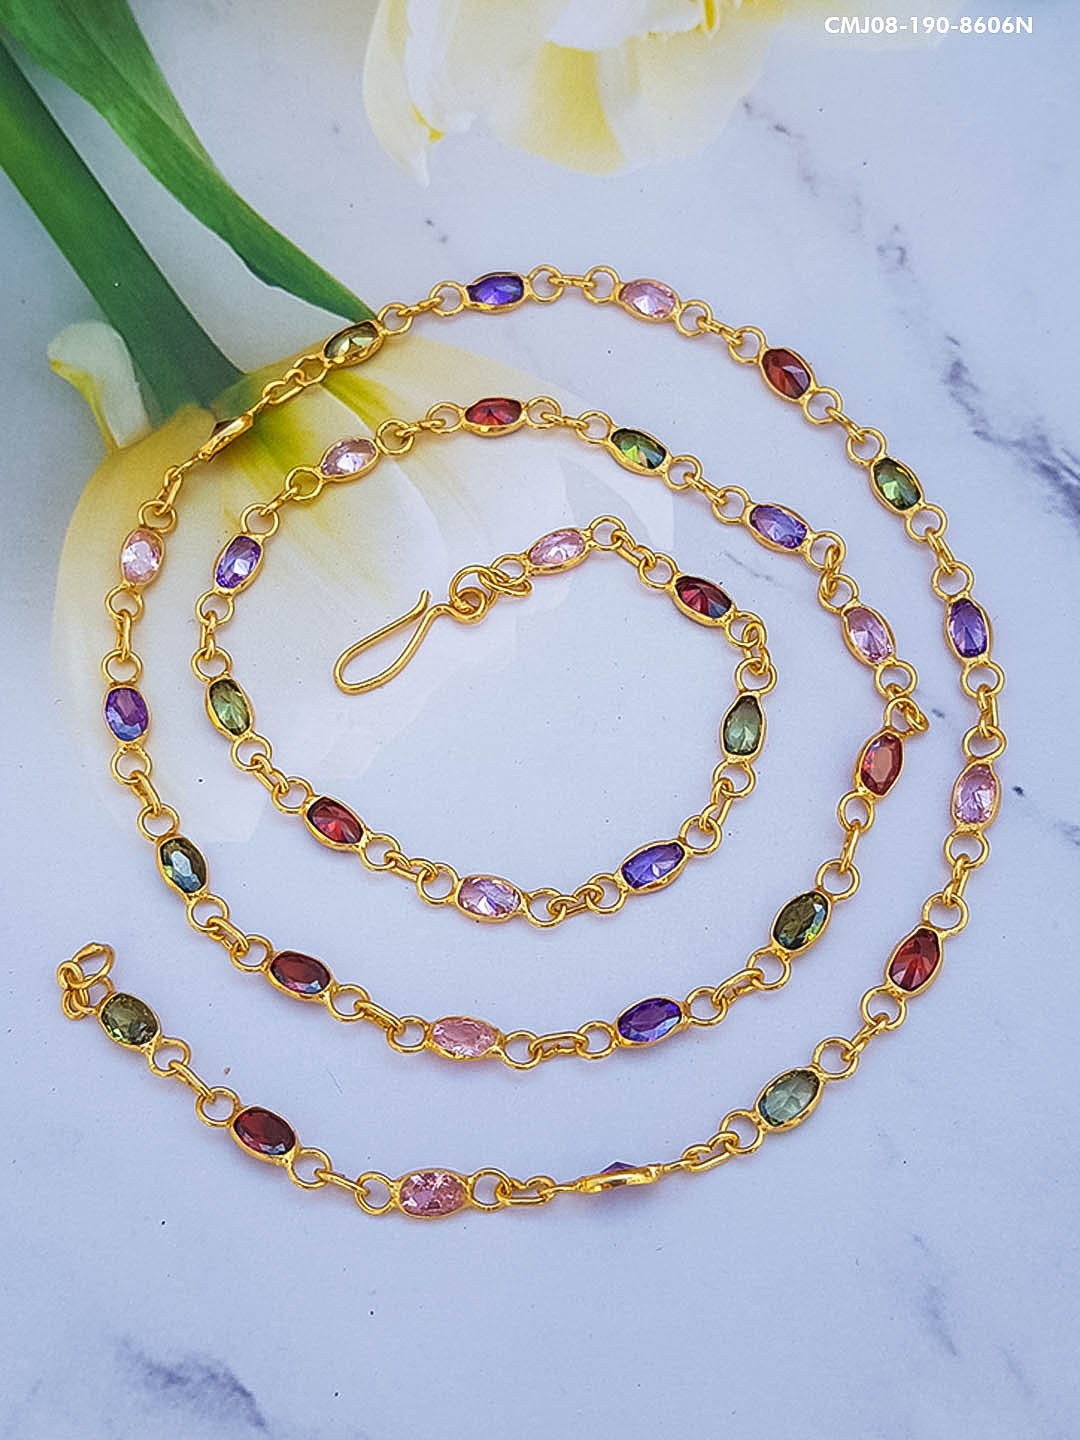 1 gm Microgold plating Multicolor stones chain 30 centi meter 8606N